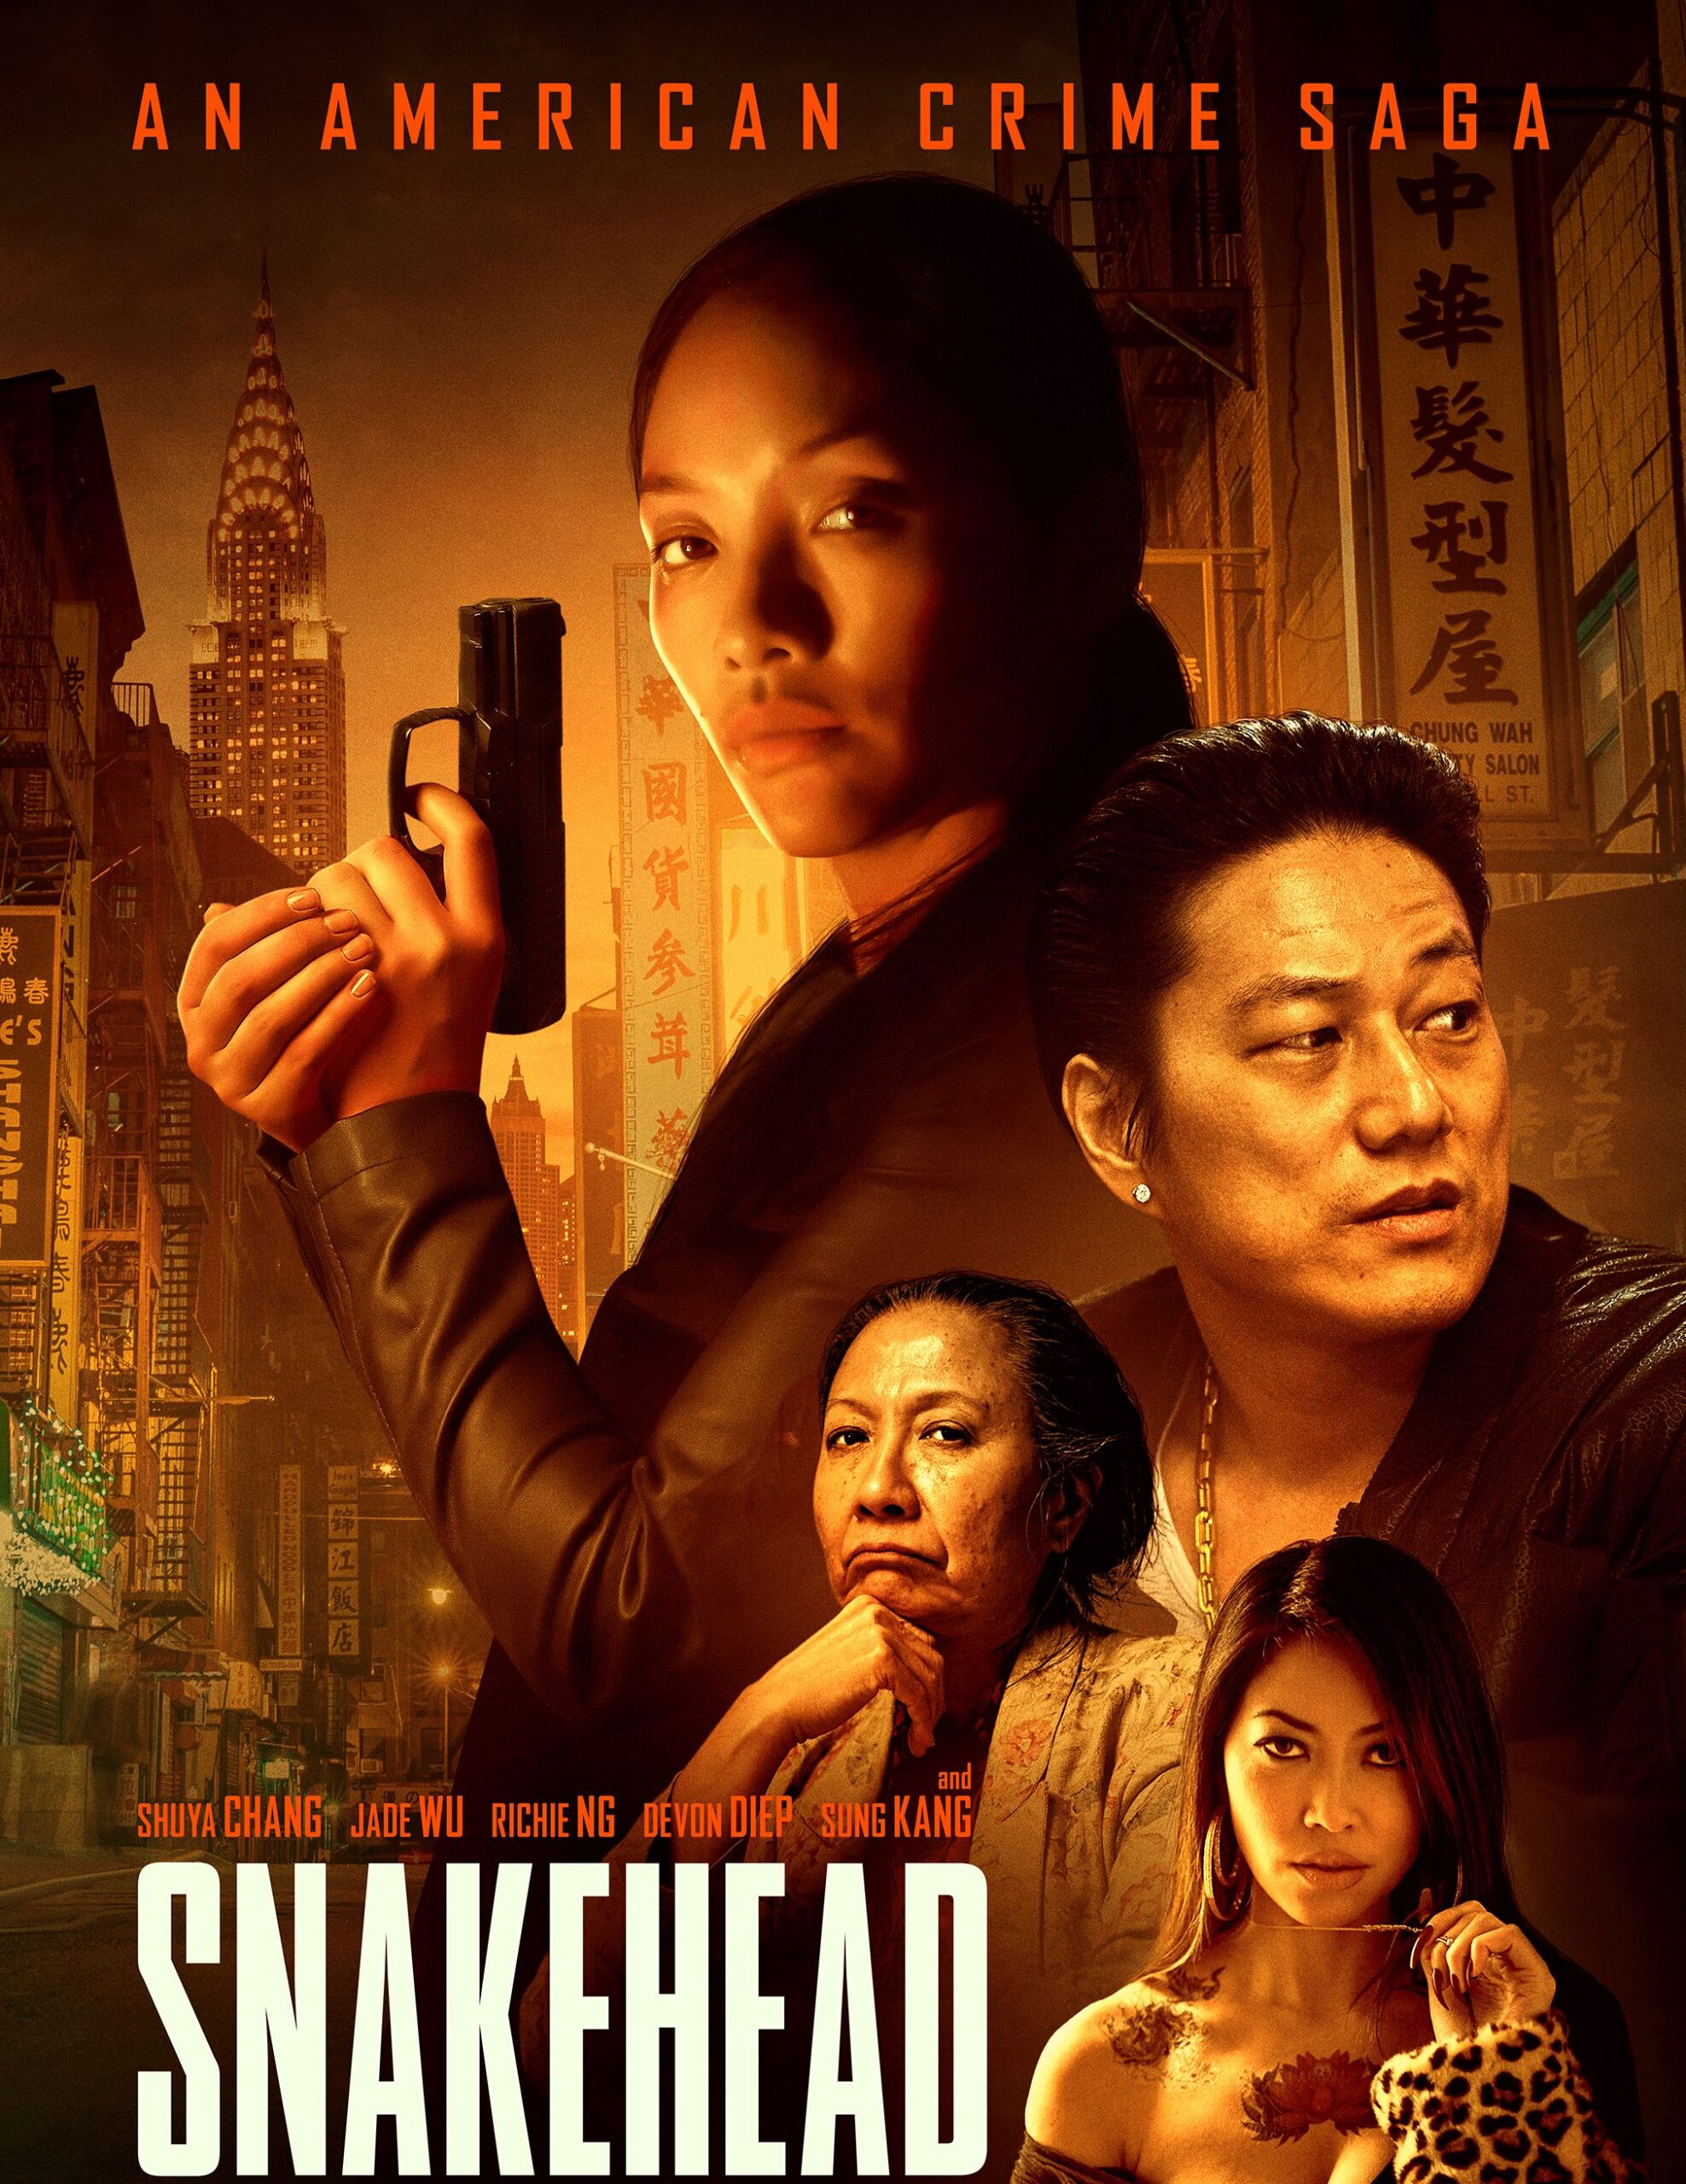 Where to watch Snakehead